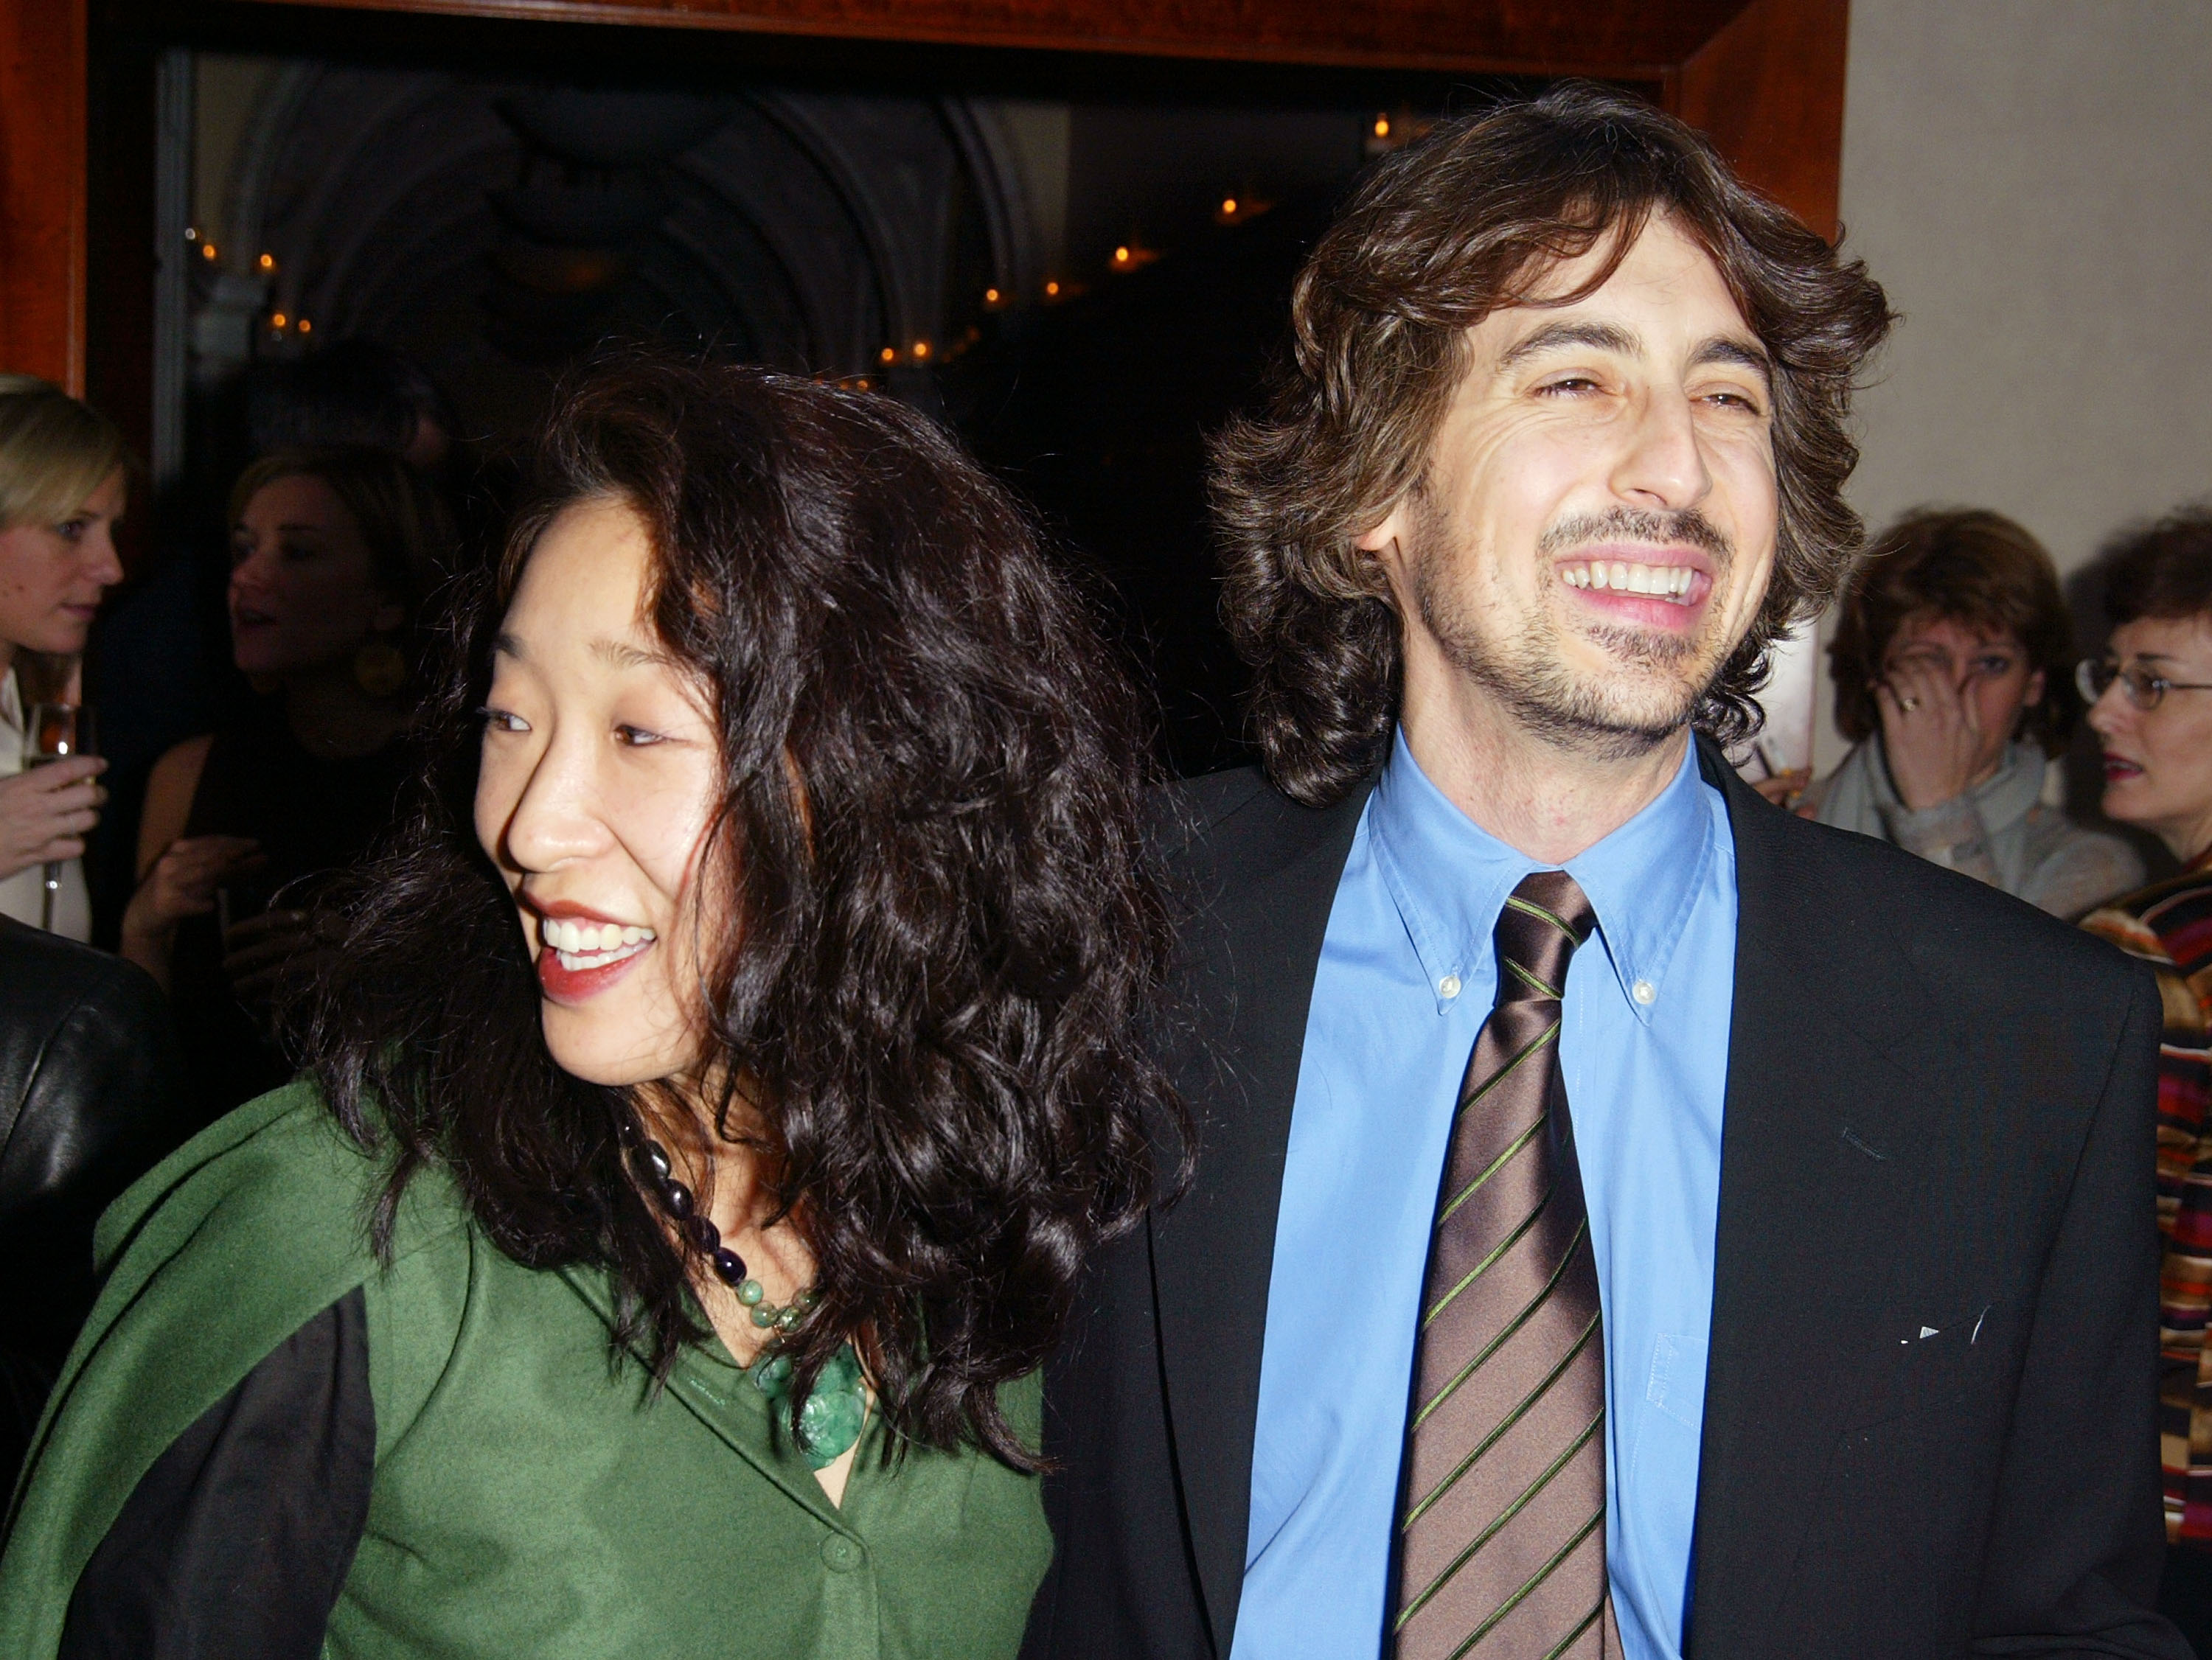 Alexander Payne and Sandra Oh, at the afterparty for the MOMA Celebration of the Films of Alexander Payne at The W Hotel Union Square, on February 25, 2003, in New York City. | Source: Getty Images